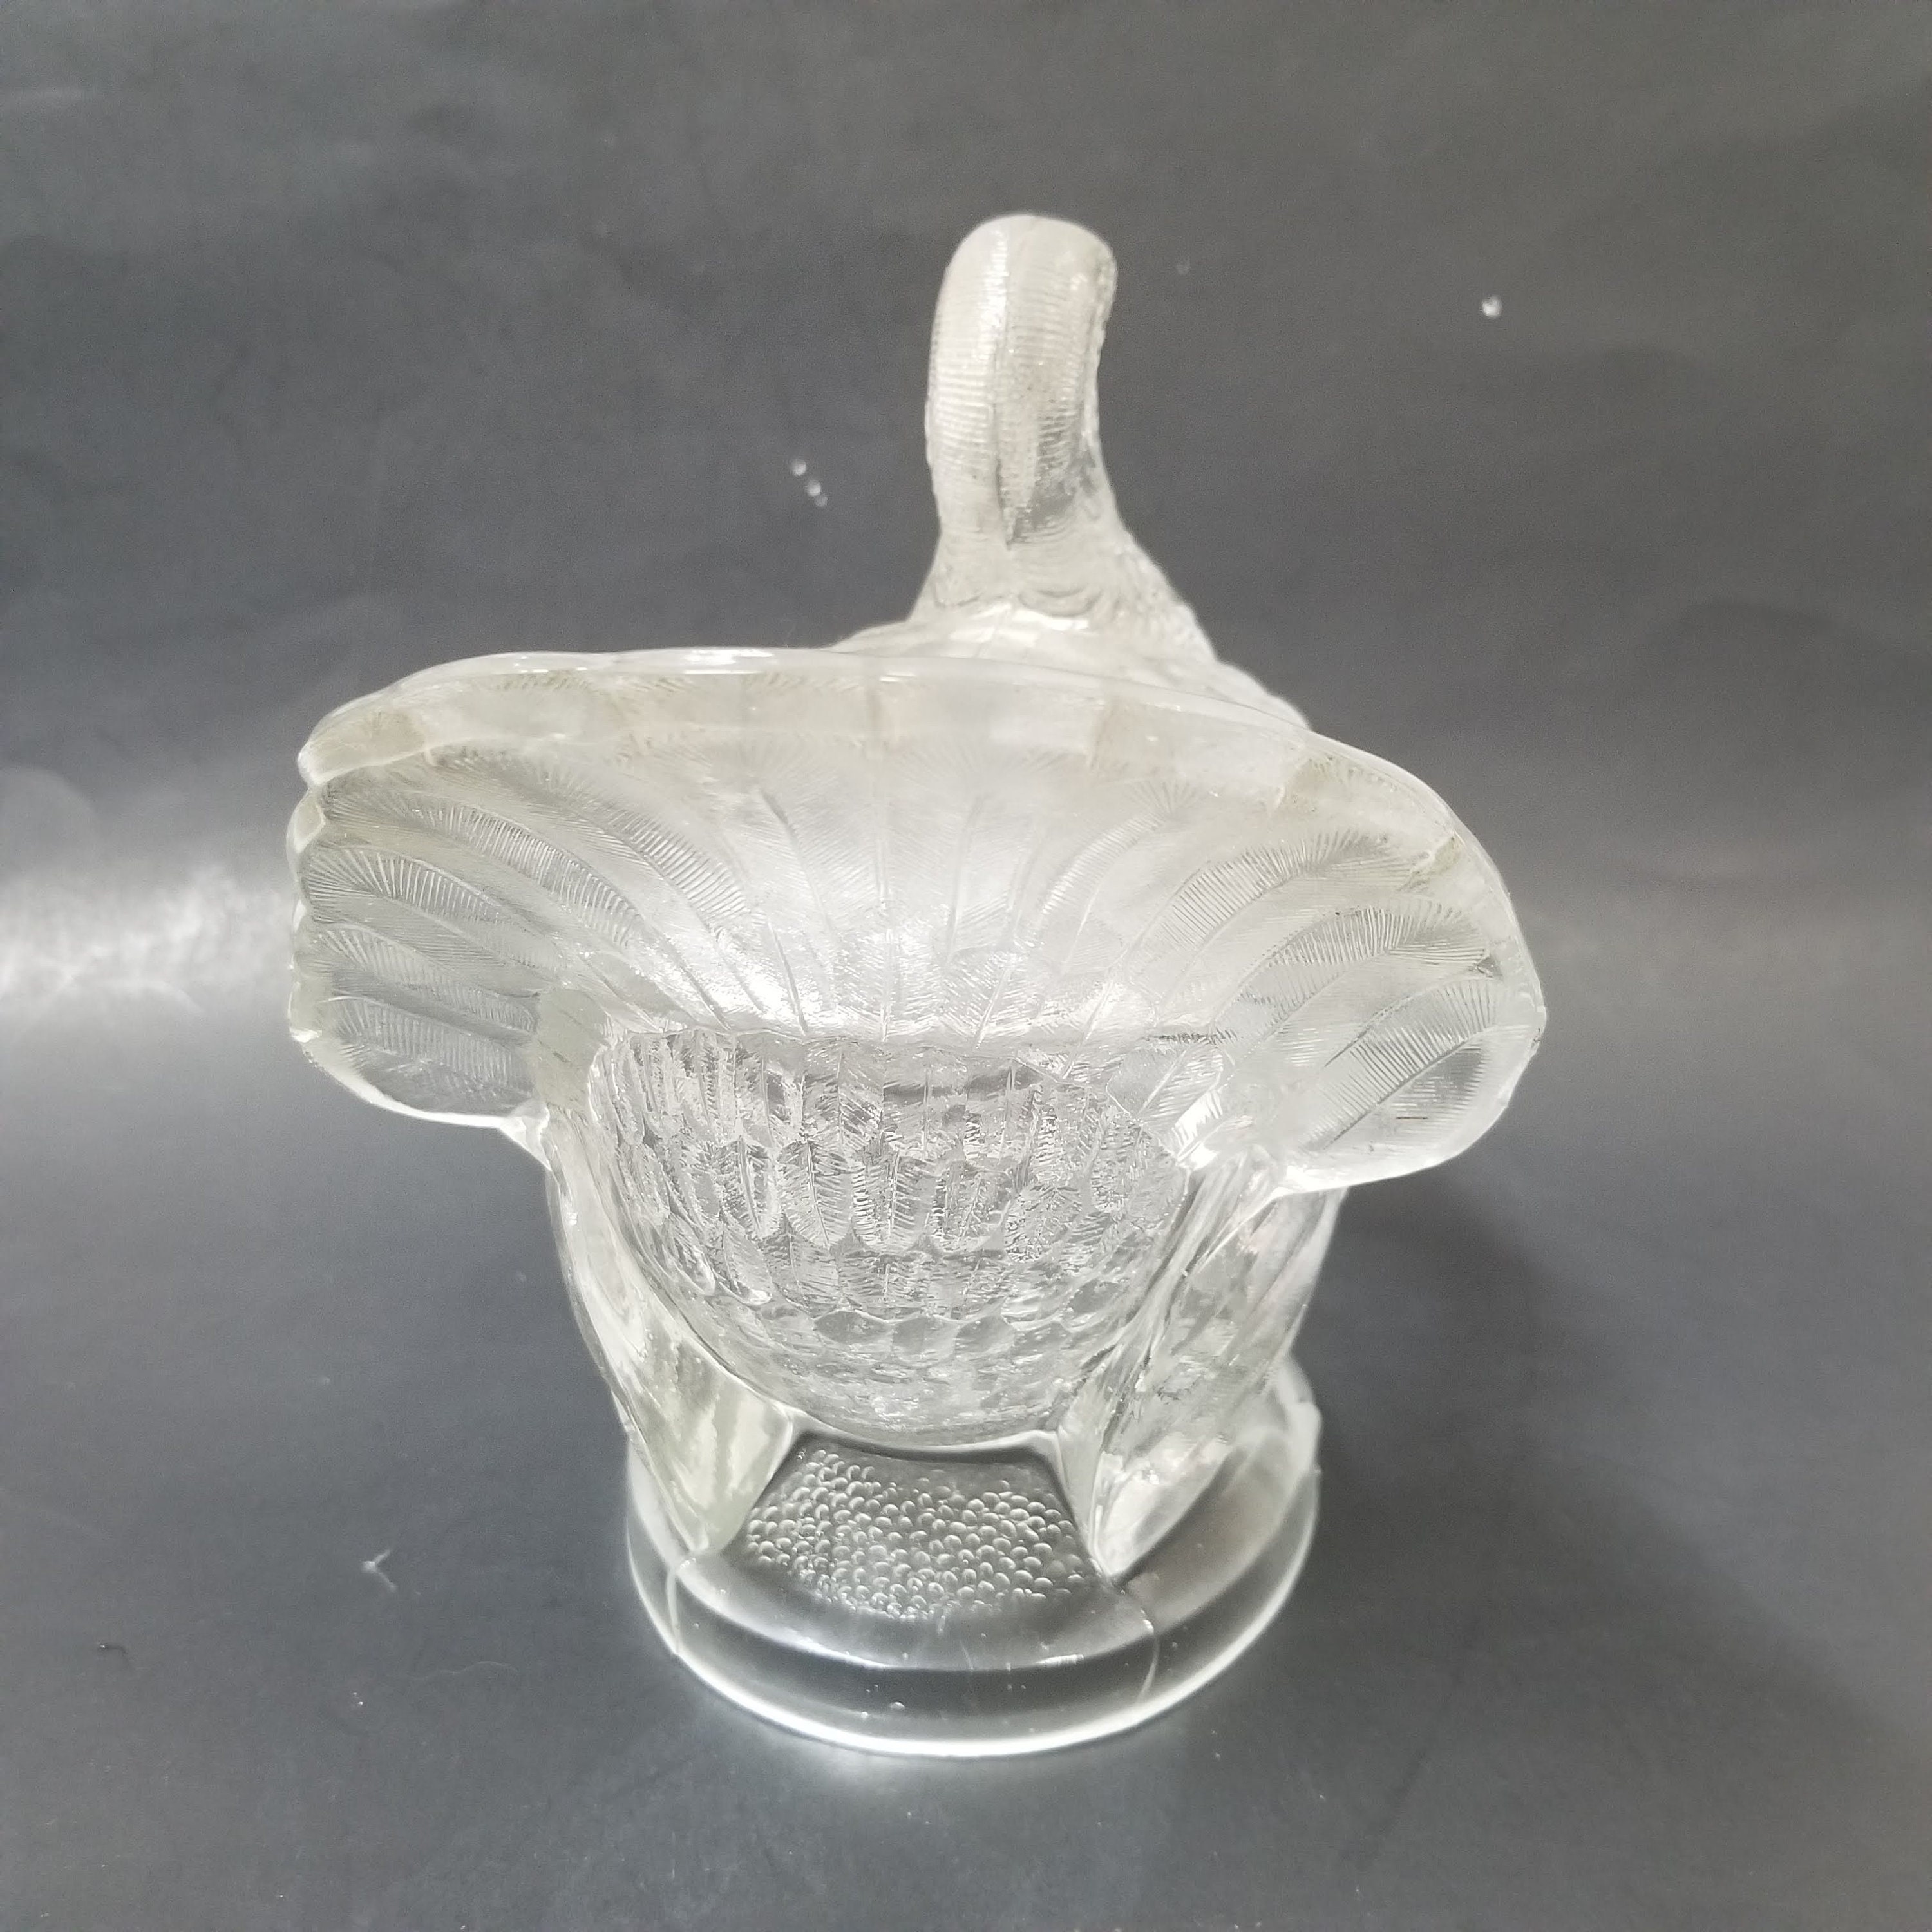 Turkey Candy Dish With Lid Vintage Clear Glass Compote